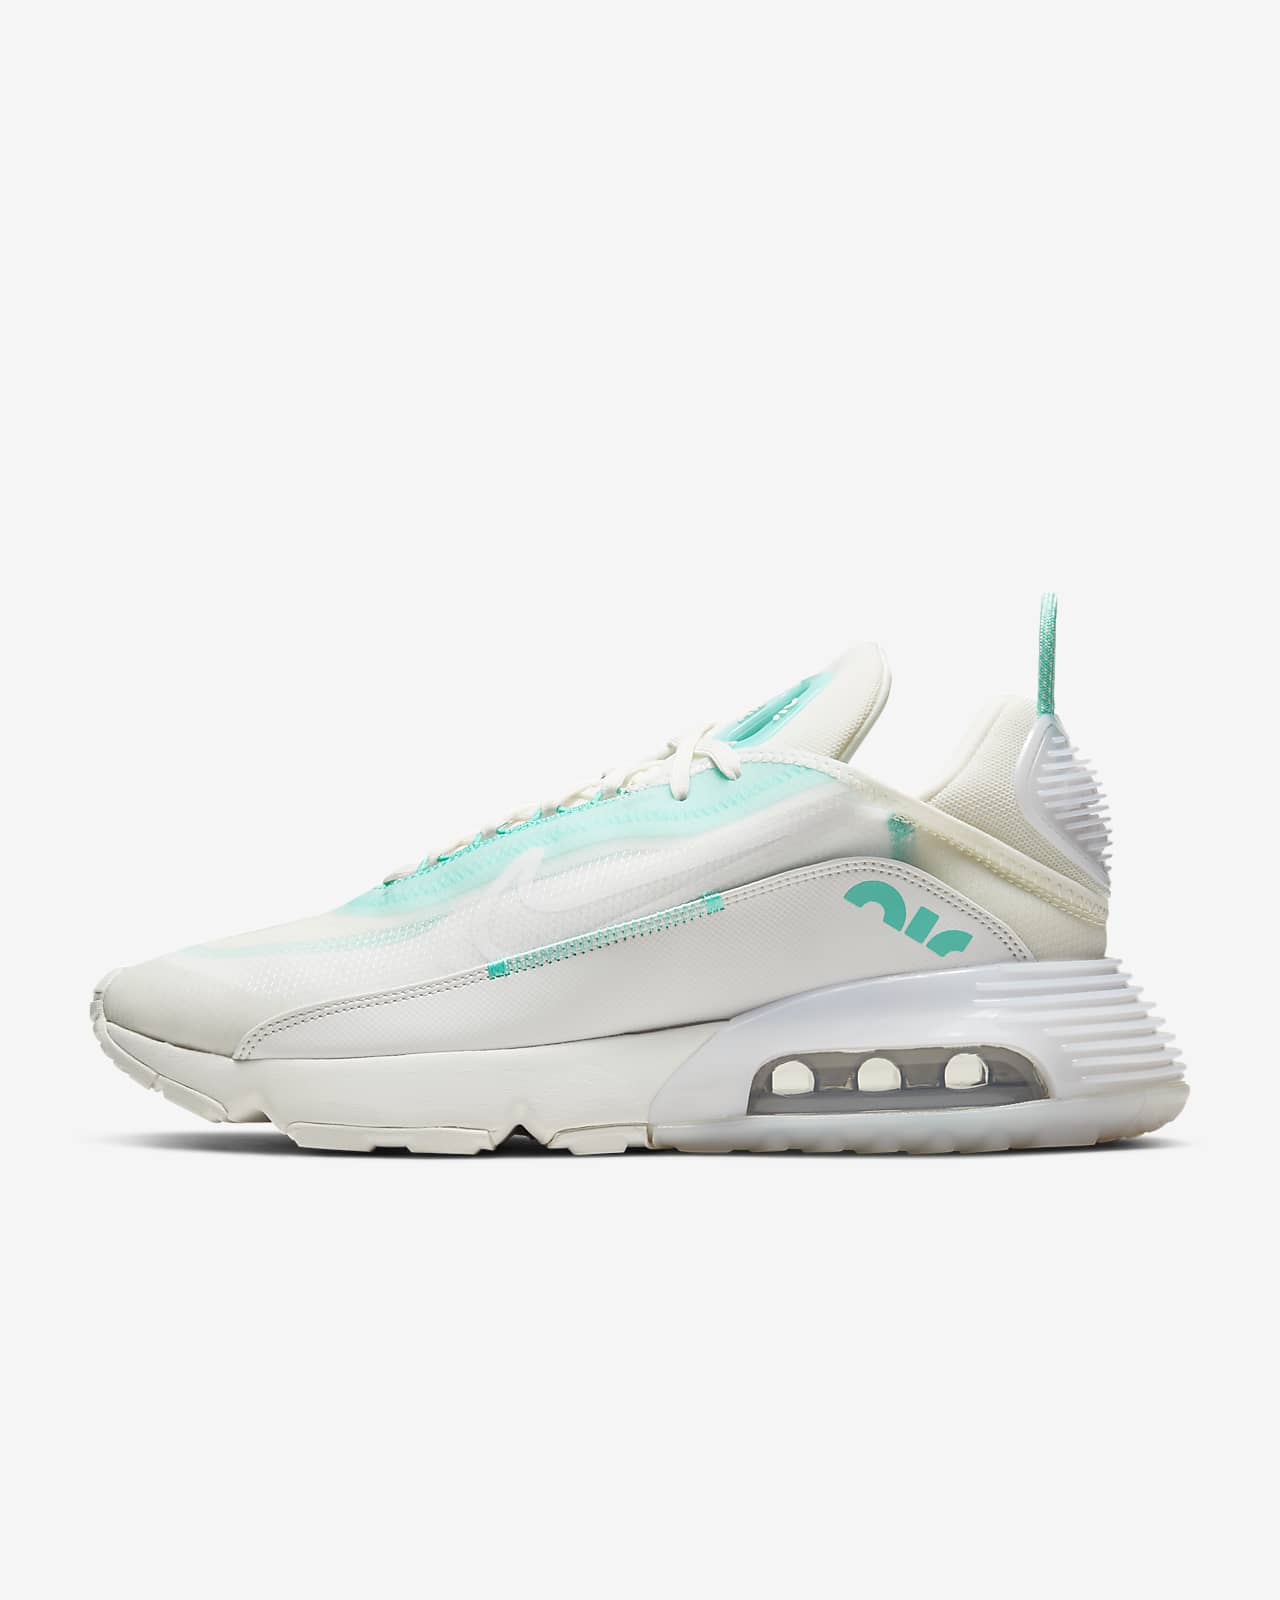 nike shoes air max price in philippines